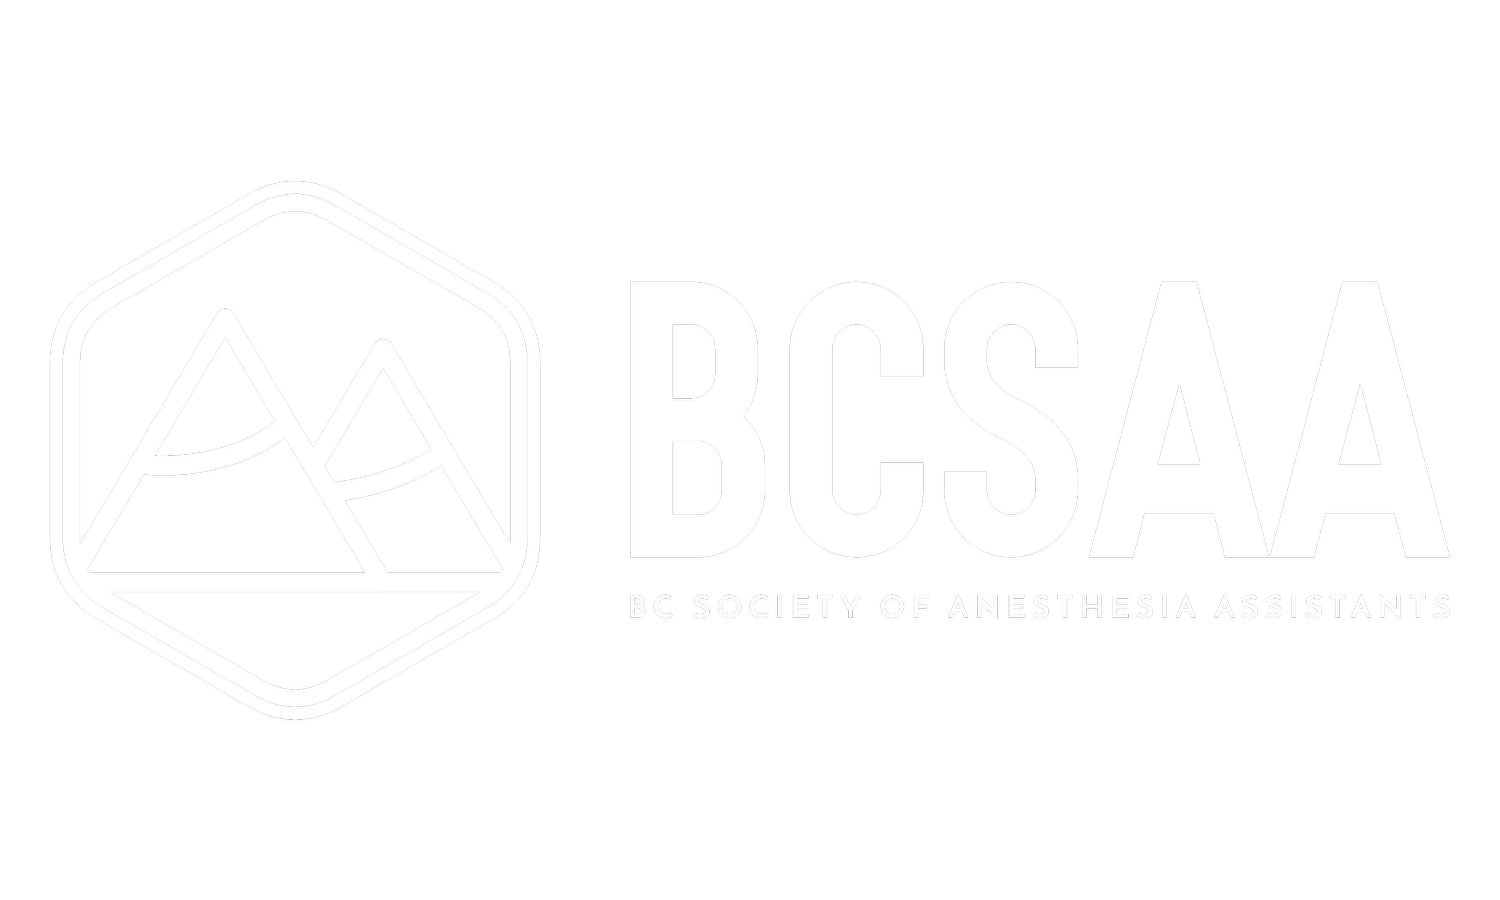 British Columbia Society of Anesthesia Assistants